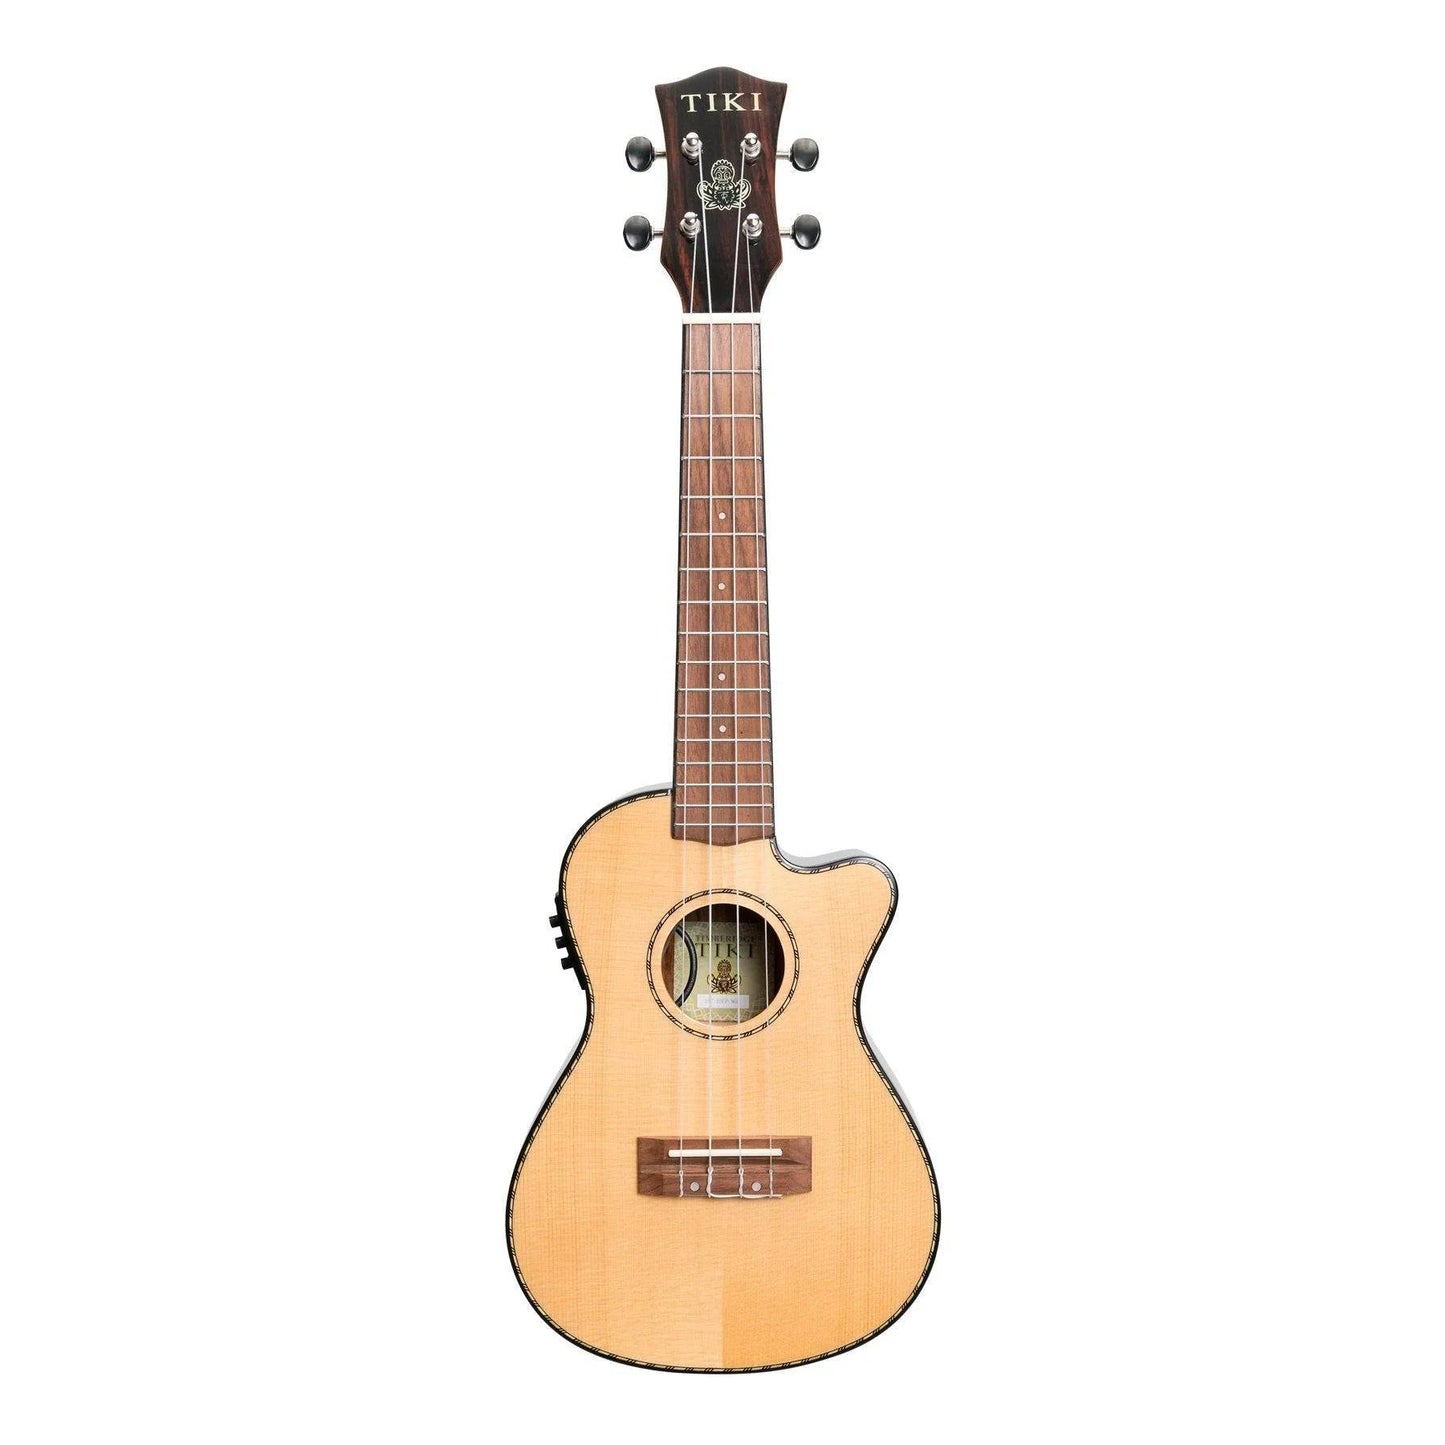 Tiki 22 Series Spruce Solid Top Electric Concert Ukulele w/ Hard Case - Natural Gloss - Joondalup Music Centre